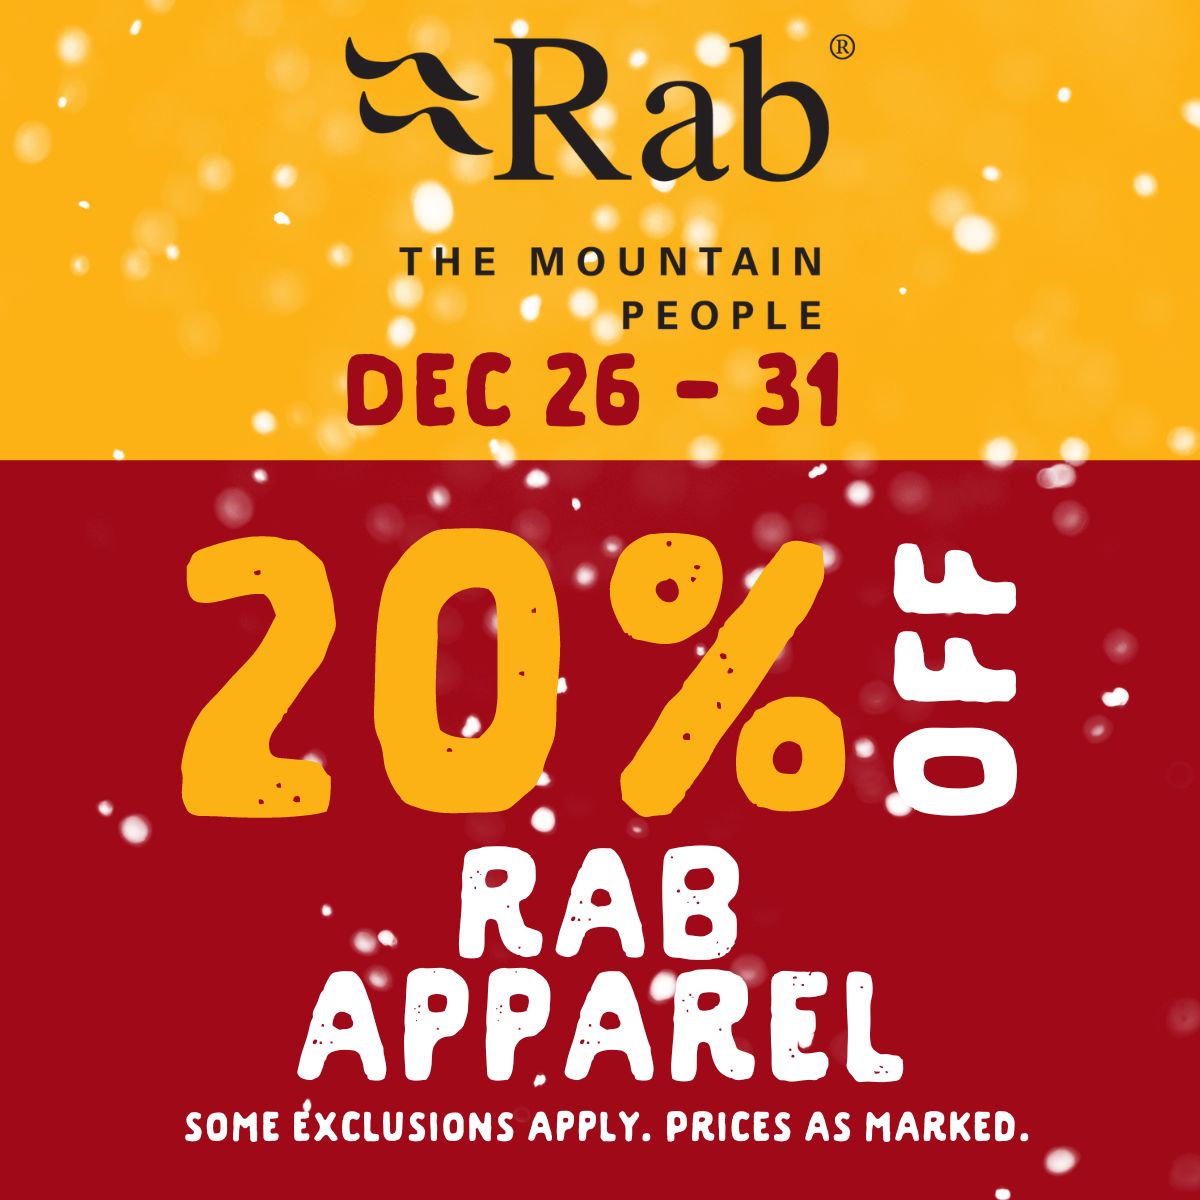 20% off Rab apparel from December 26 to 31. Some exclusions apply. Prices as marked.